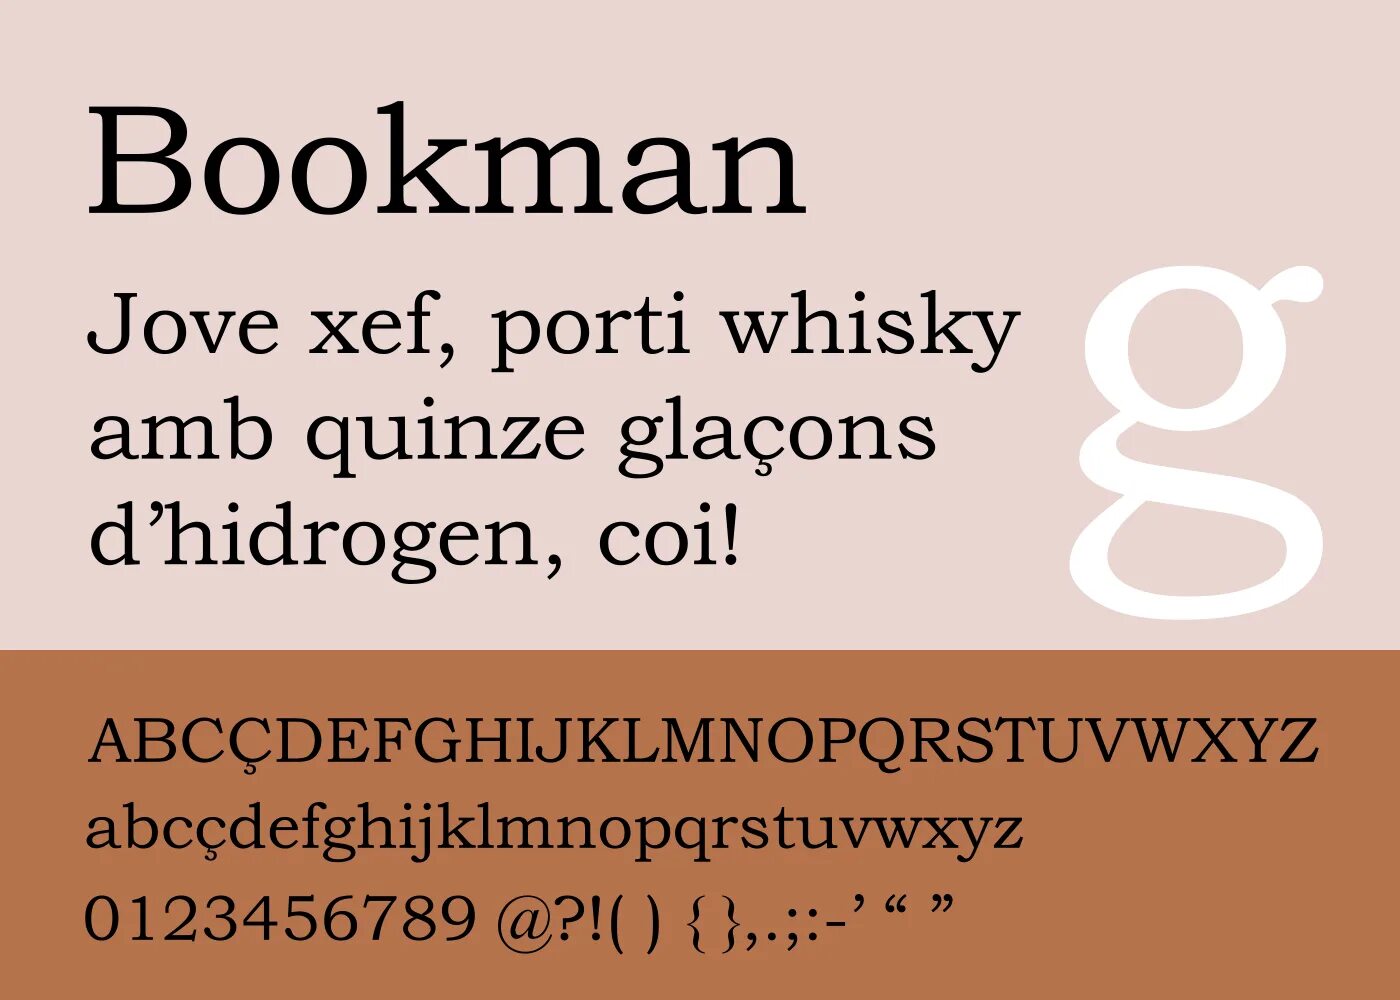 Bookman. Monotype Bookman old. Bookman old Style. Букмэн. Шрифт bookman old style